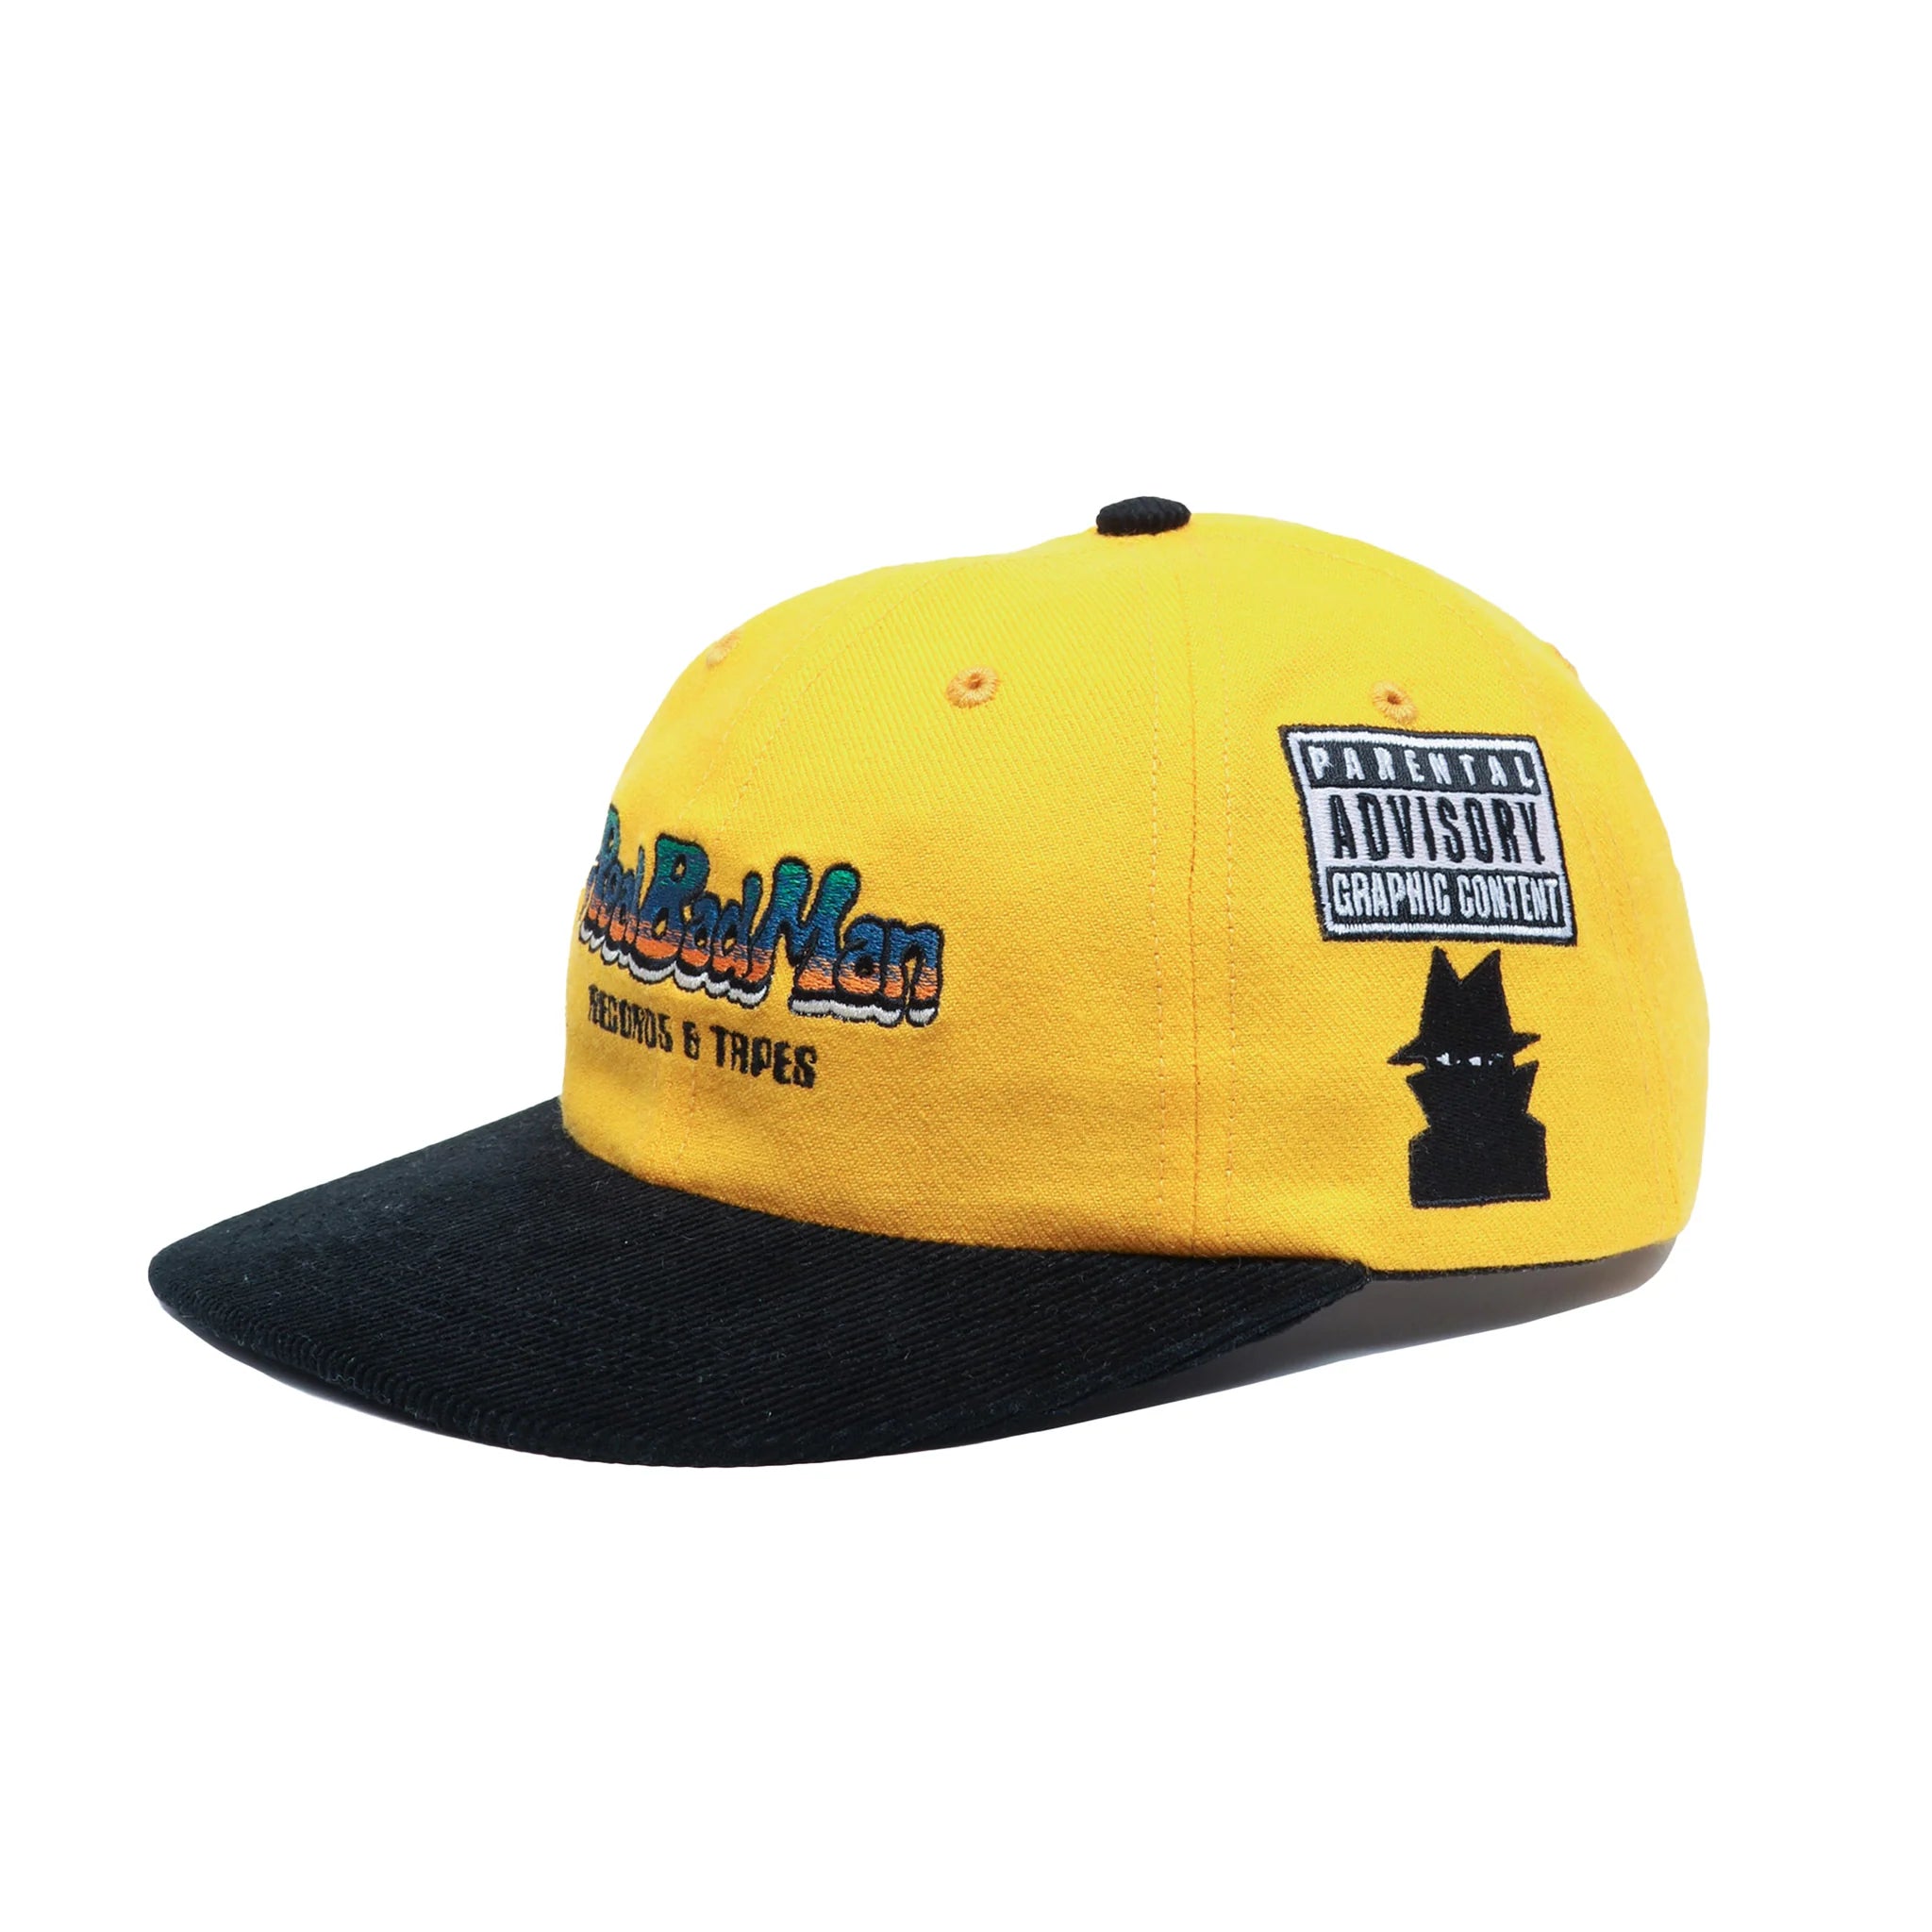 RECORDS & TAPES HAT｜YELLOW